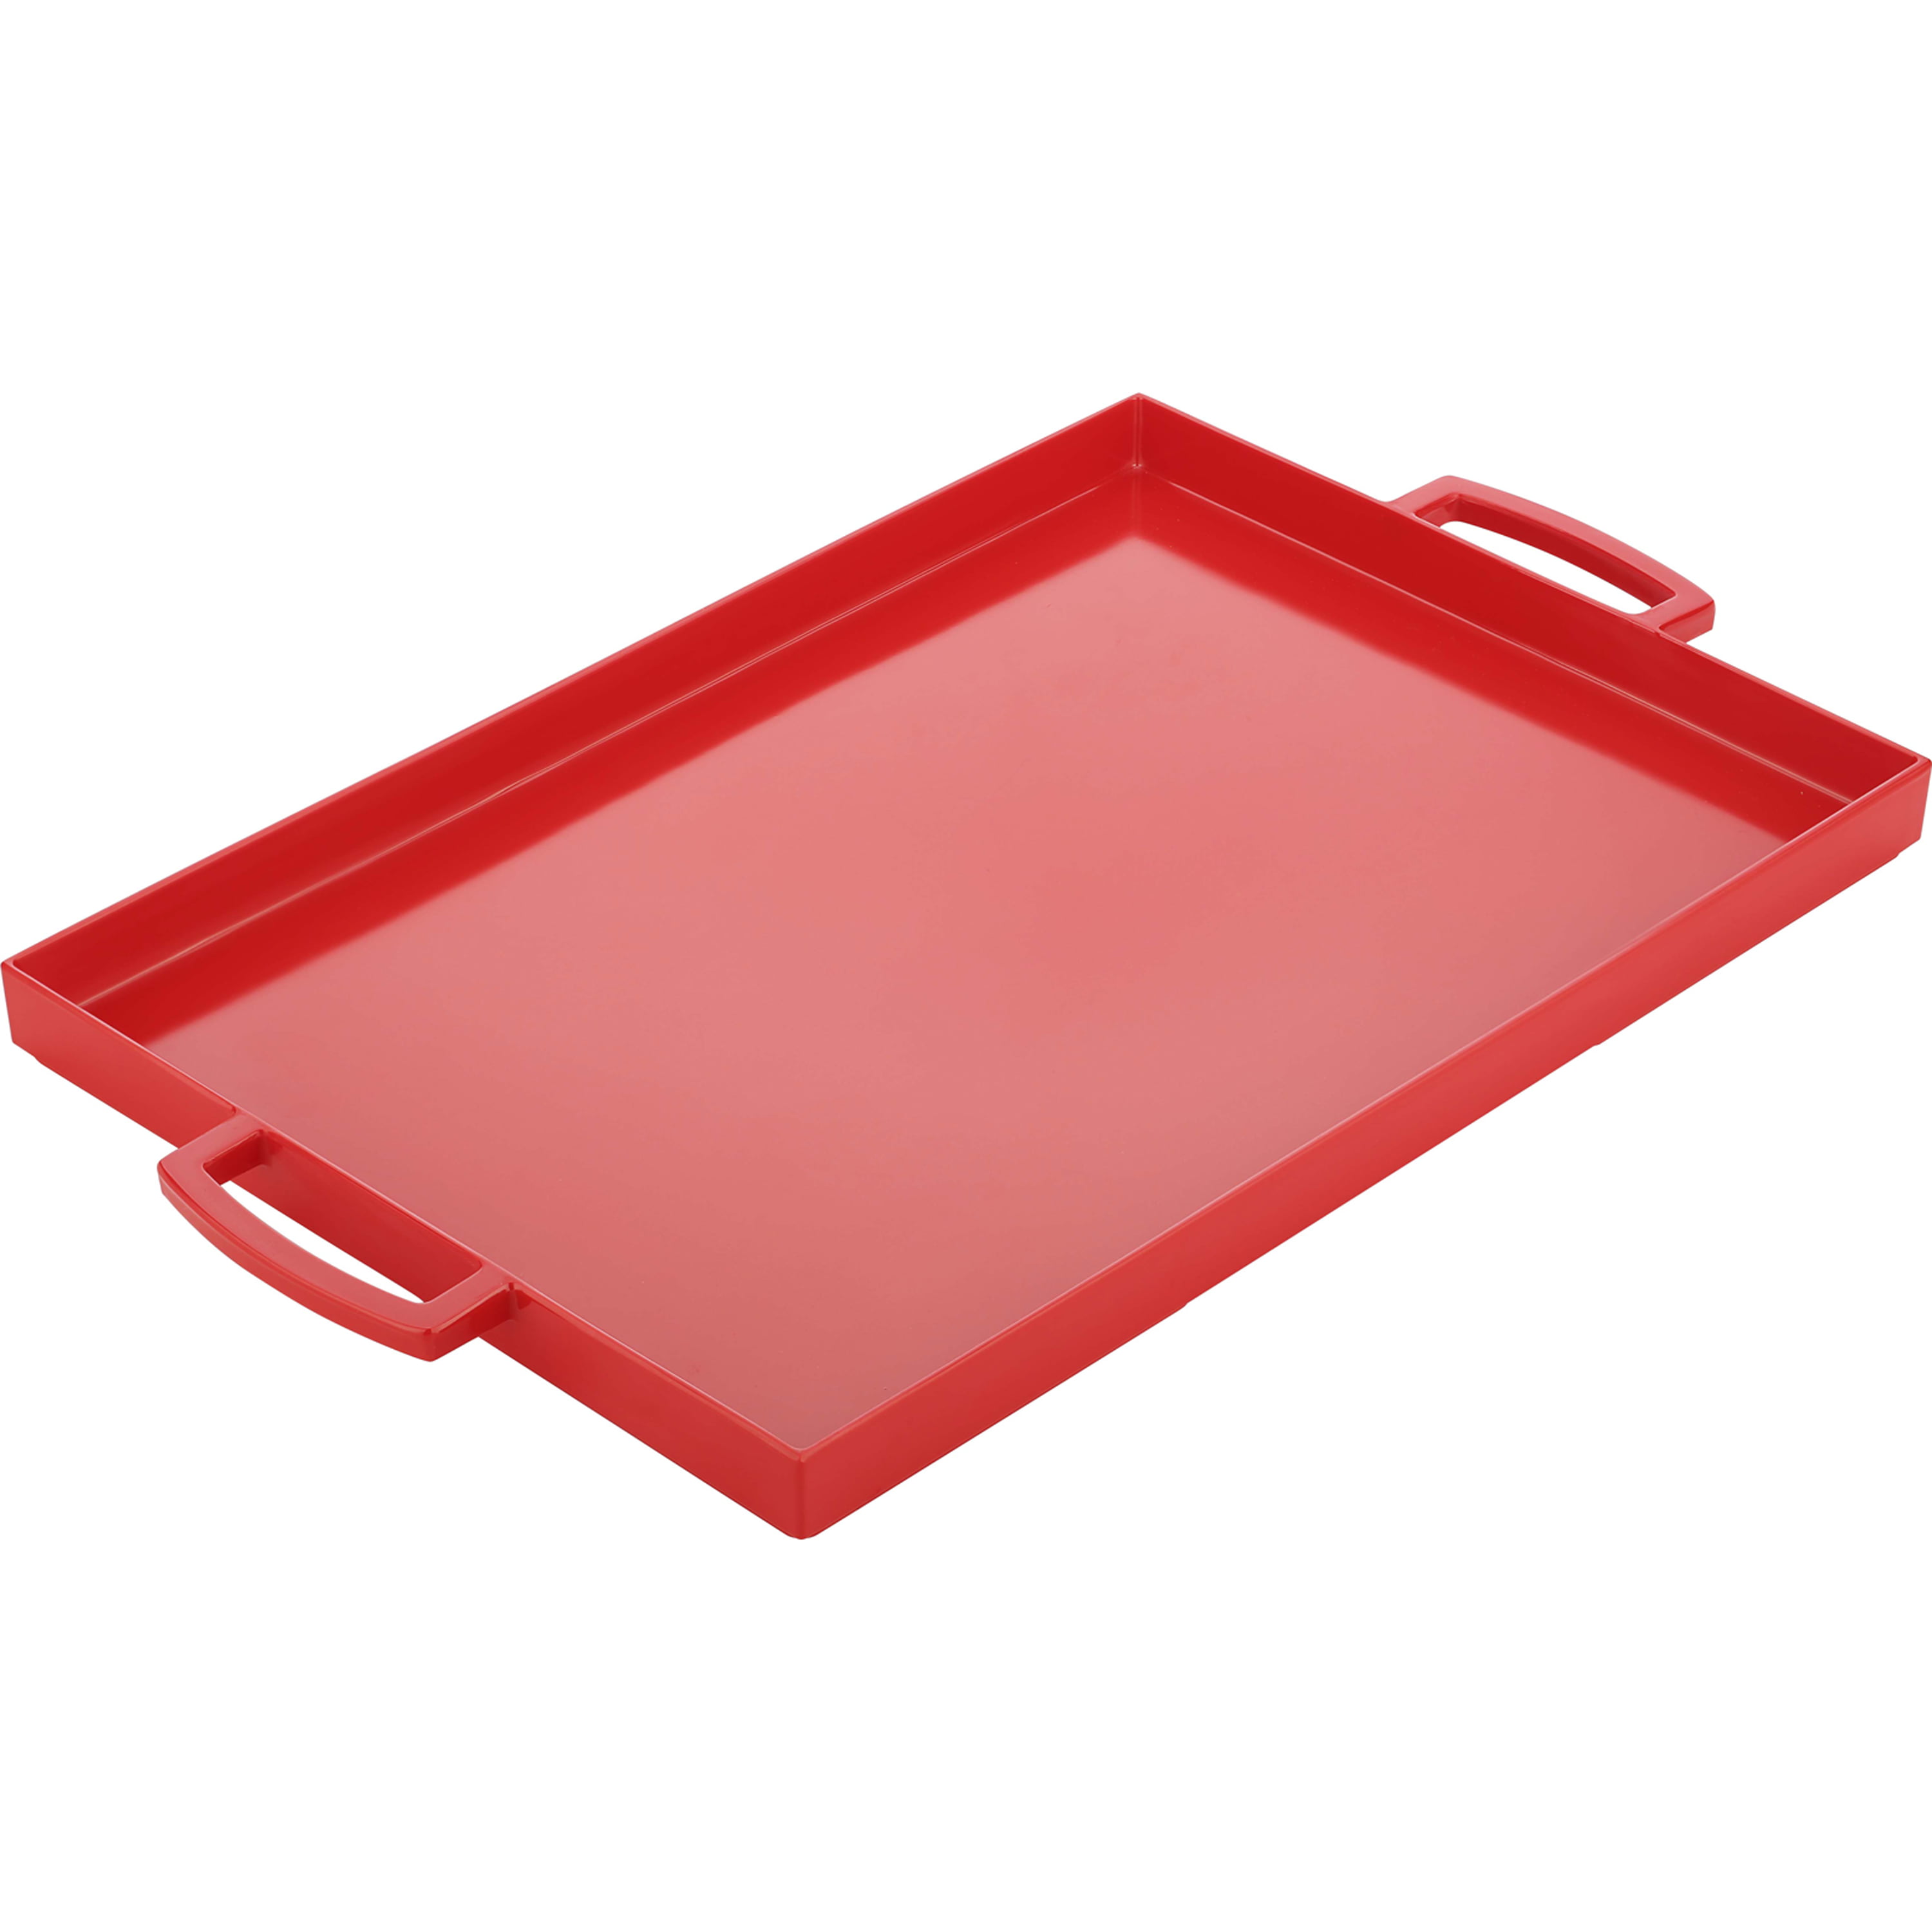 Zak Designs MeeMe Large Rectangular Serving Tray with Wide